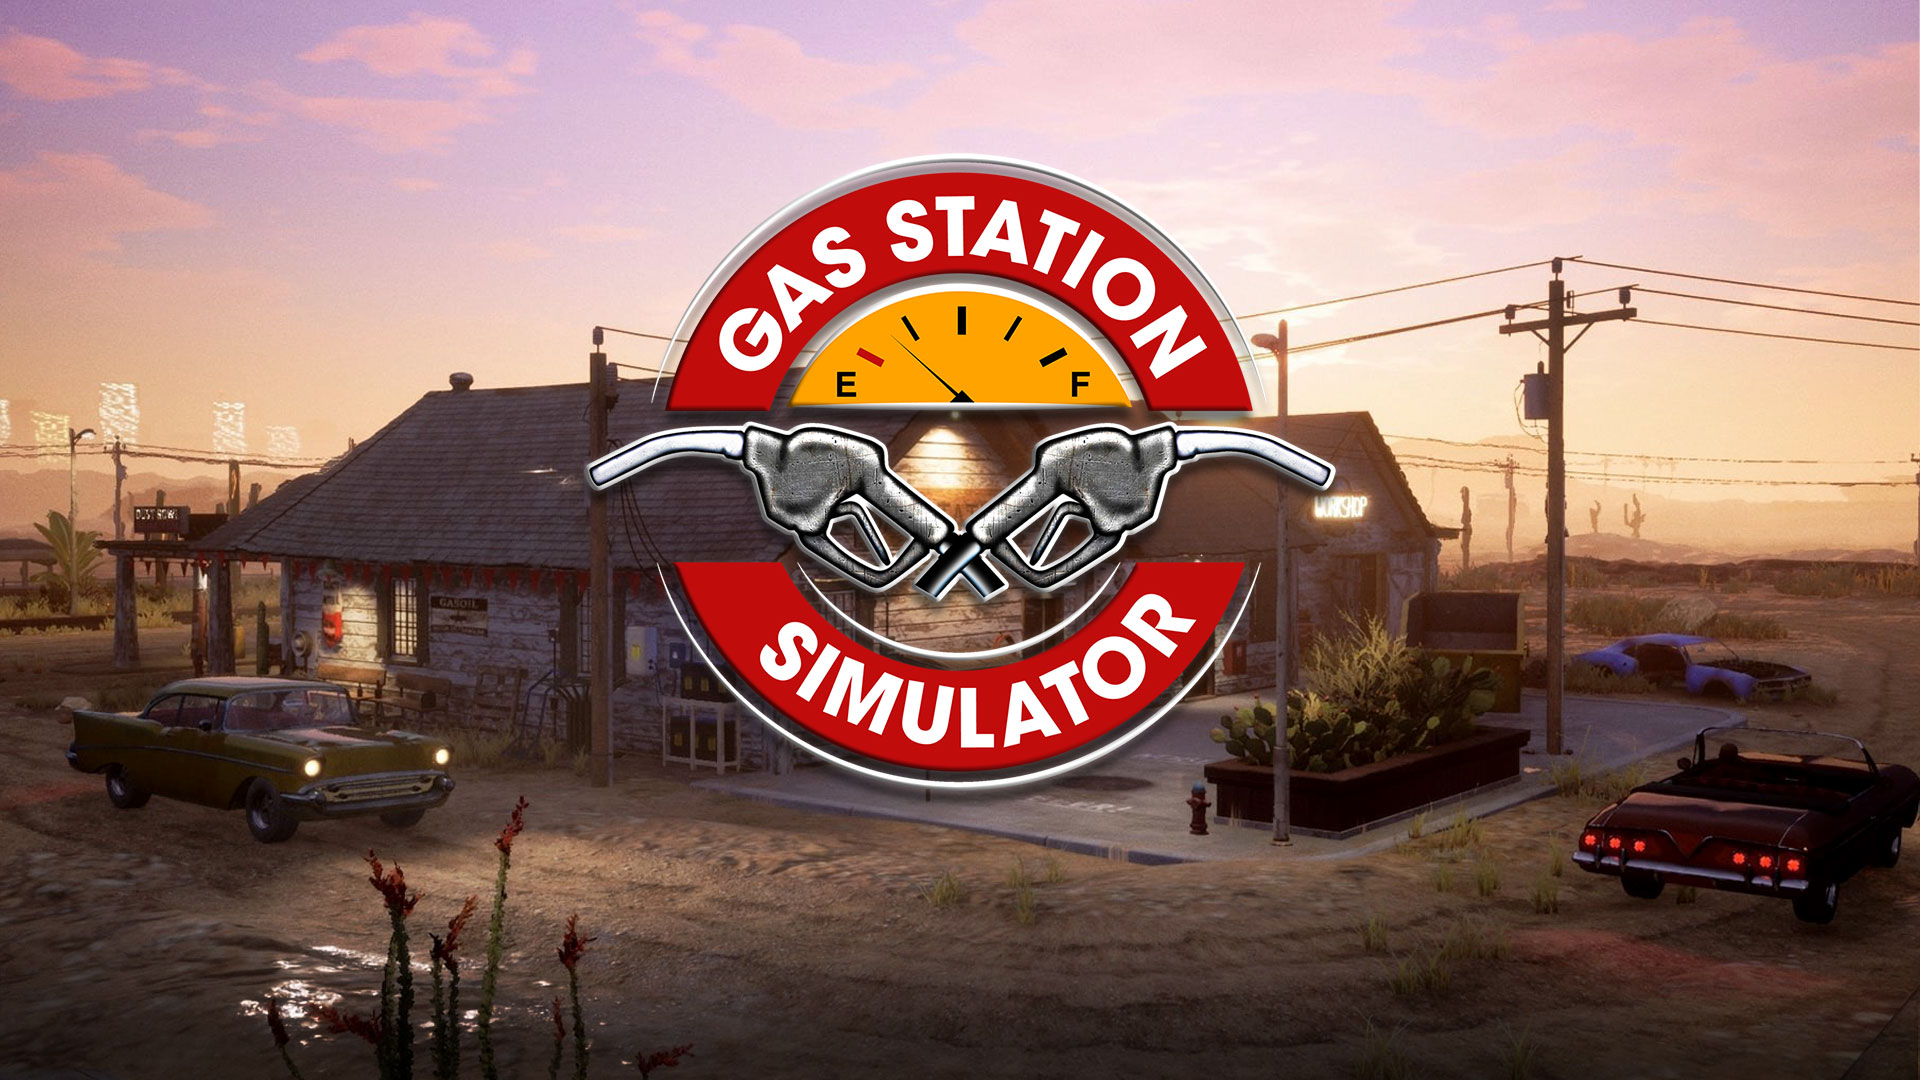 Gas Station Simulator Codes - Christmas Update - Try Hard Guides